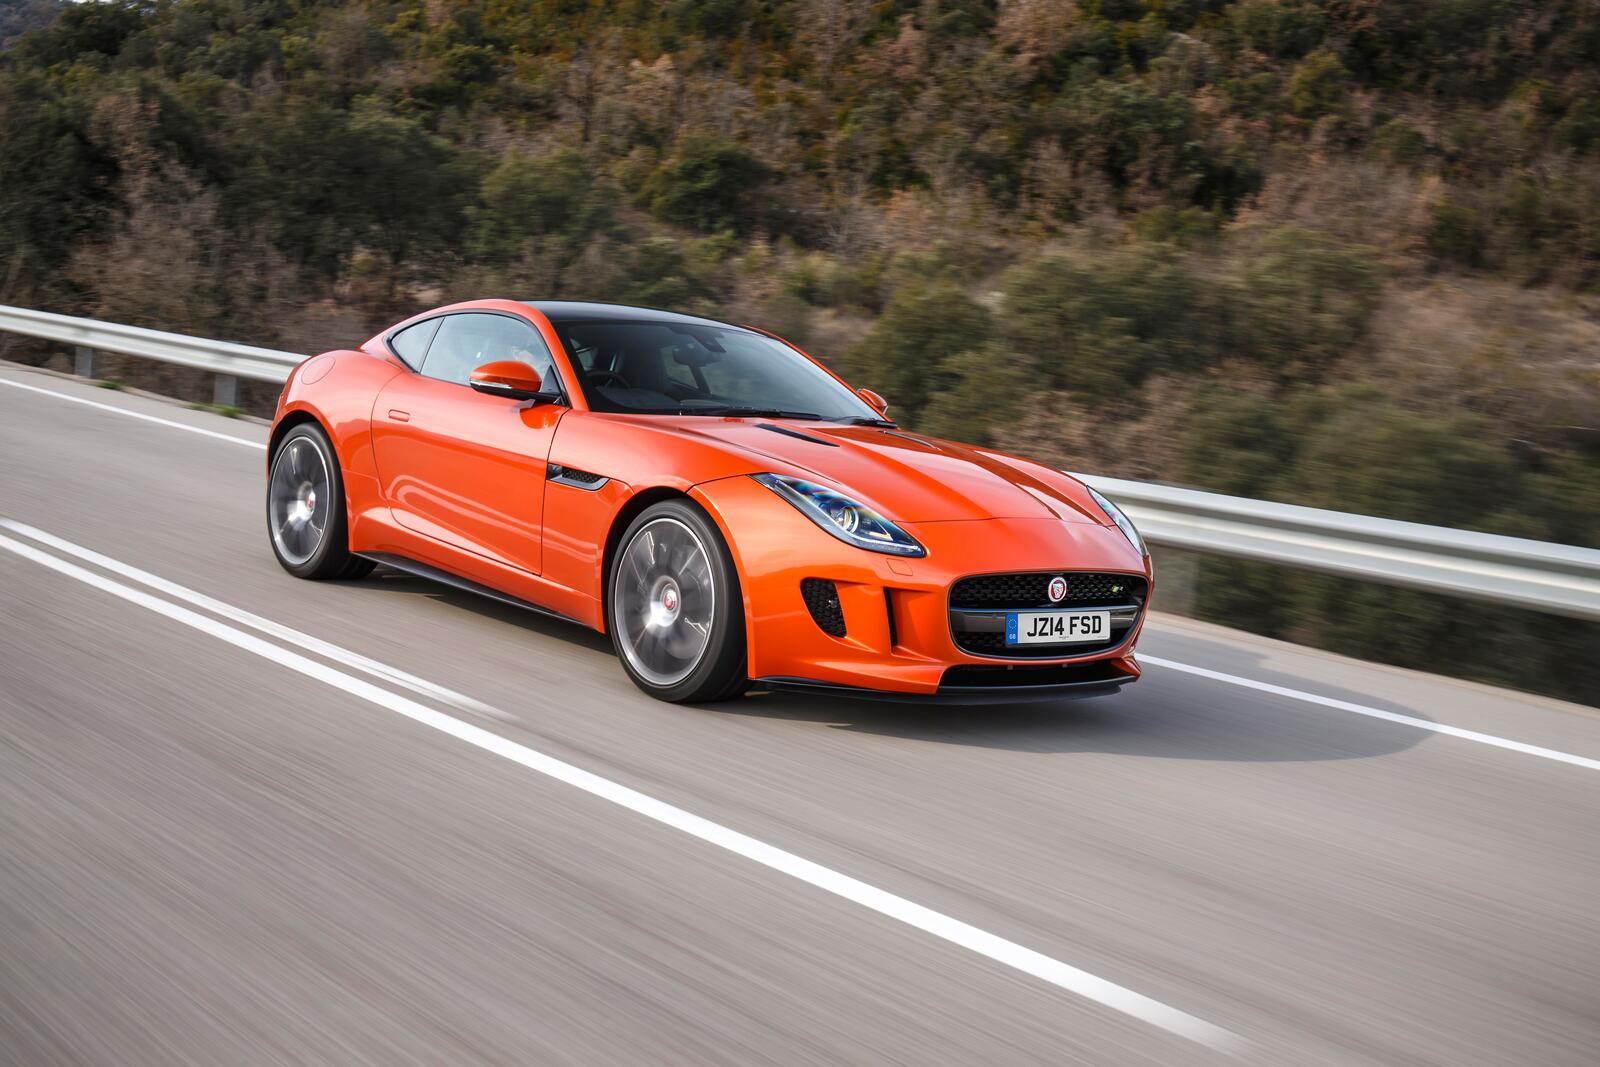 Free photo A bright orange Jaguar F Type driving down a country road.